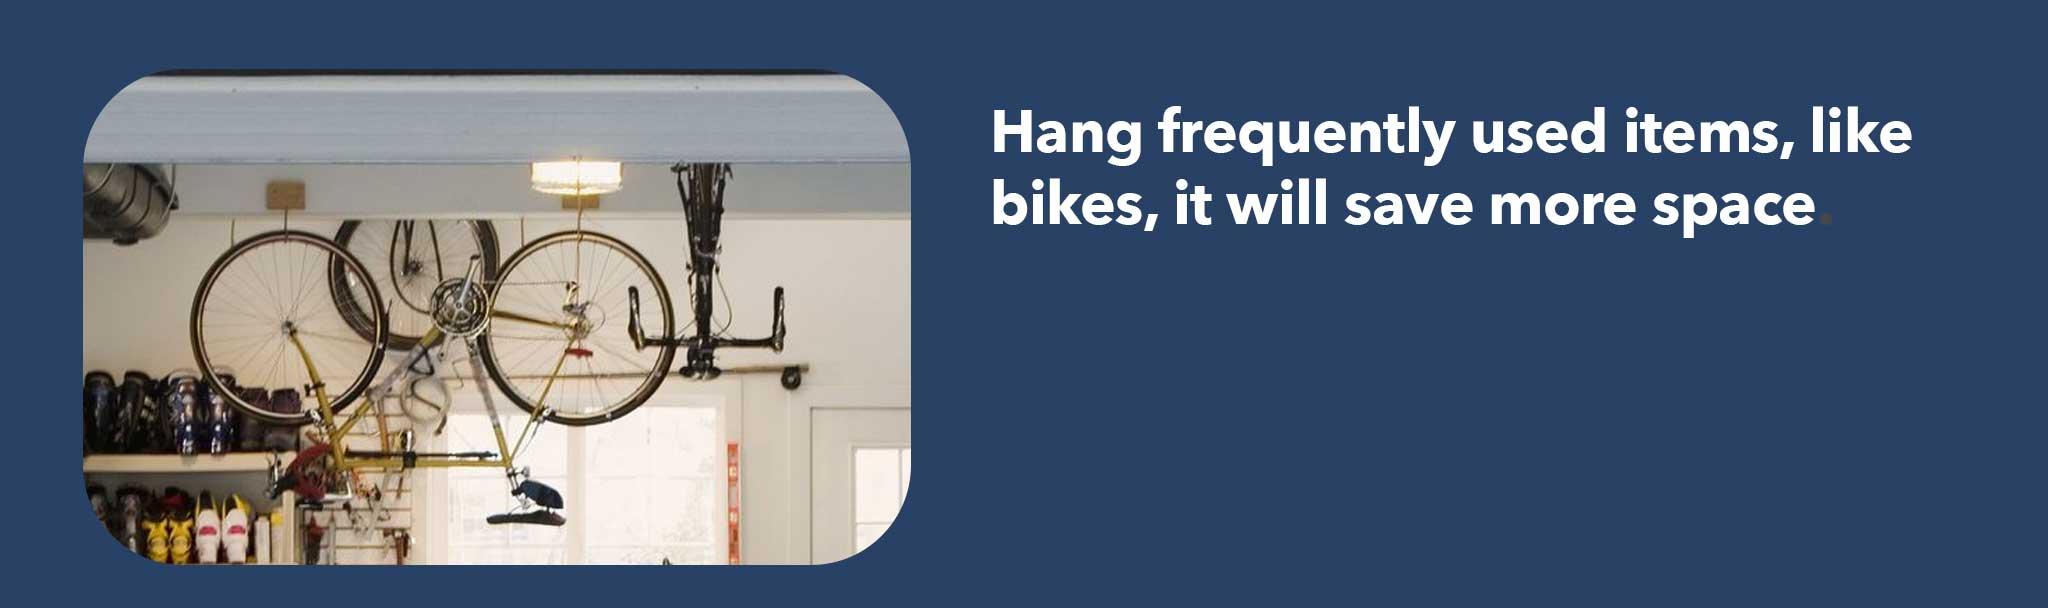 Hang frequently used items, like bikes, it will save more space.